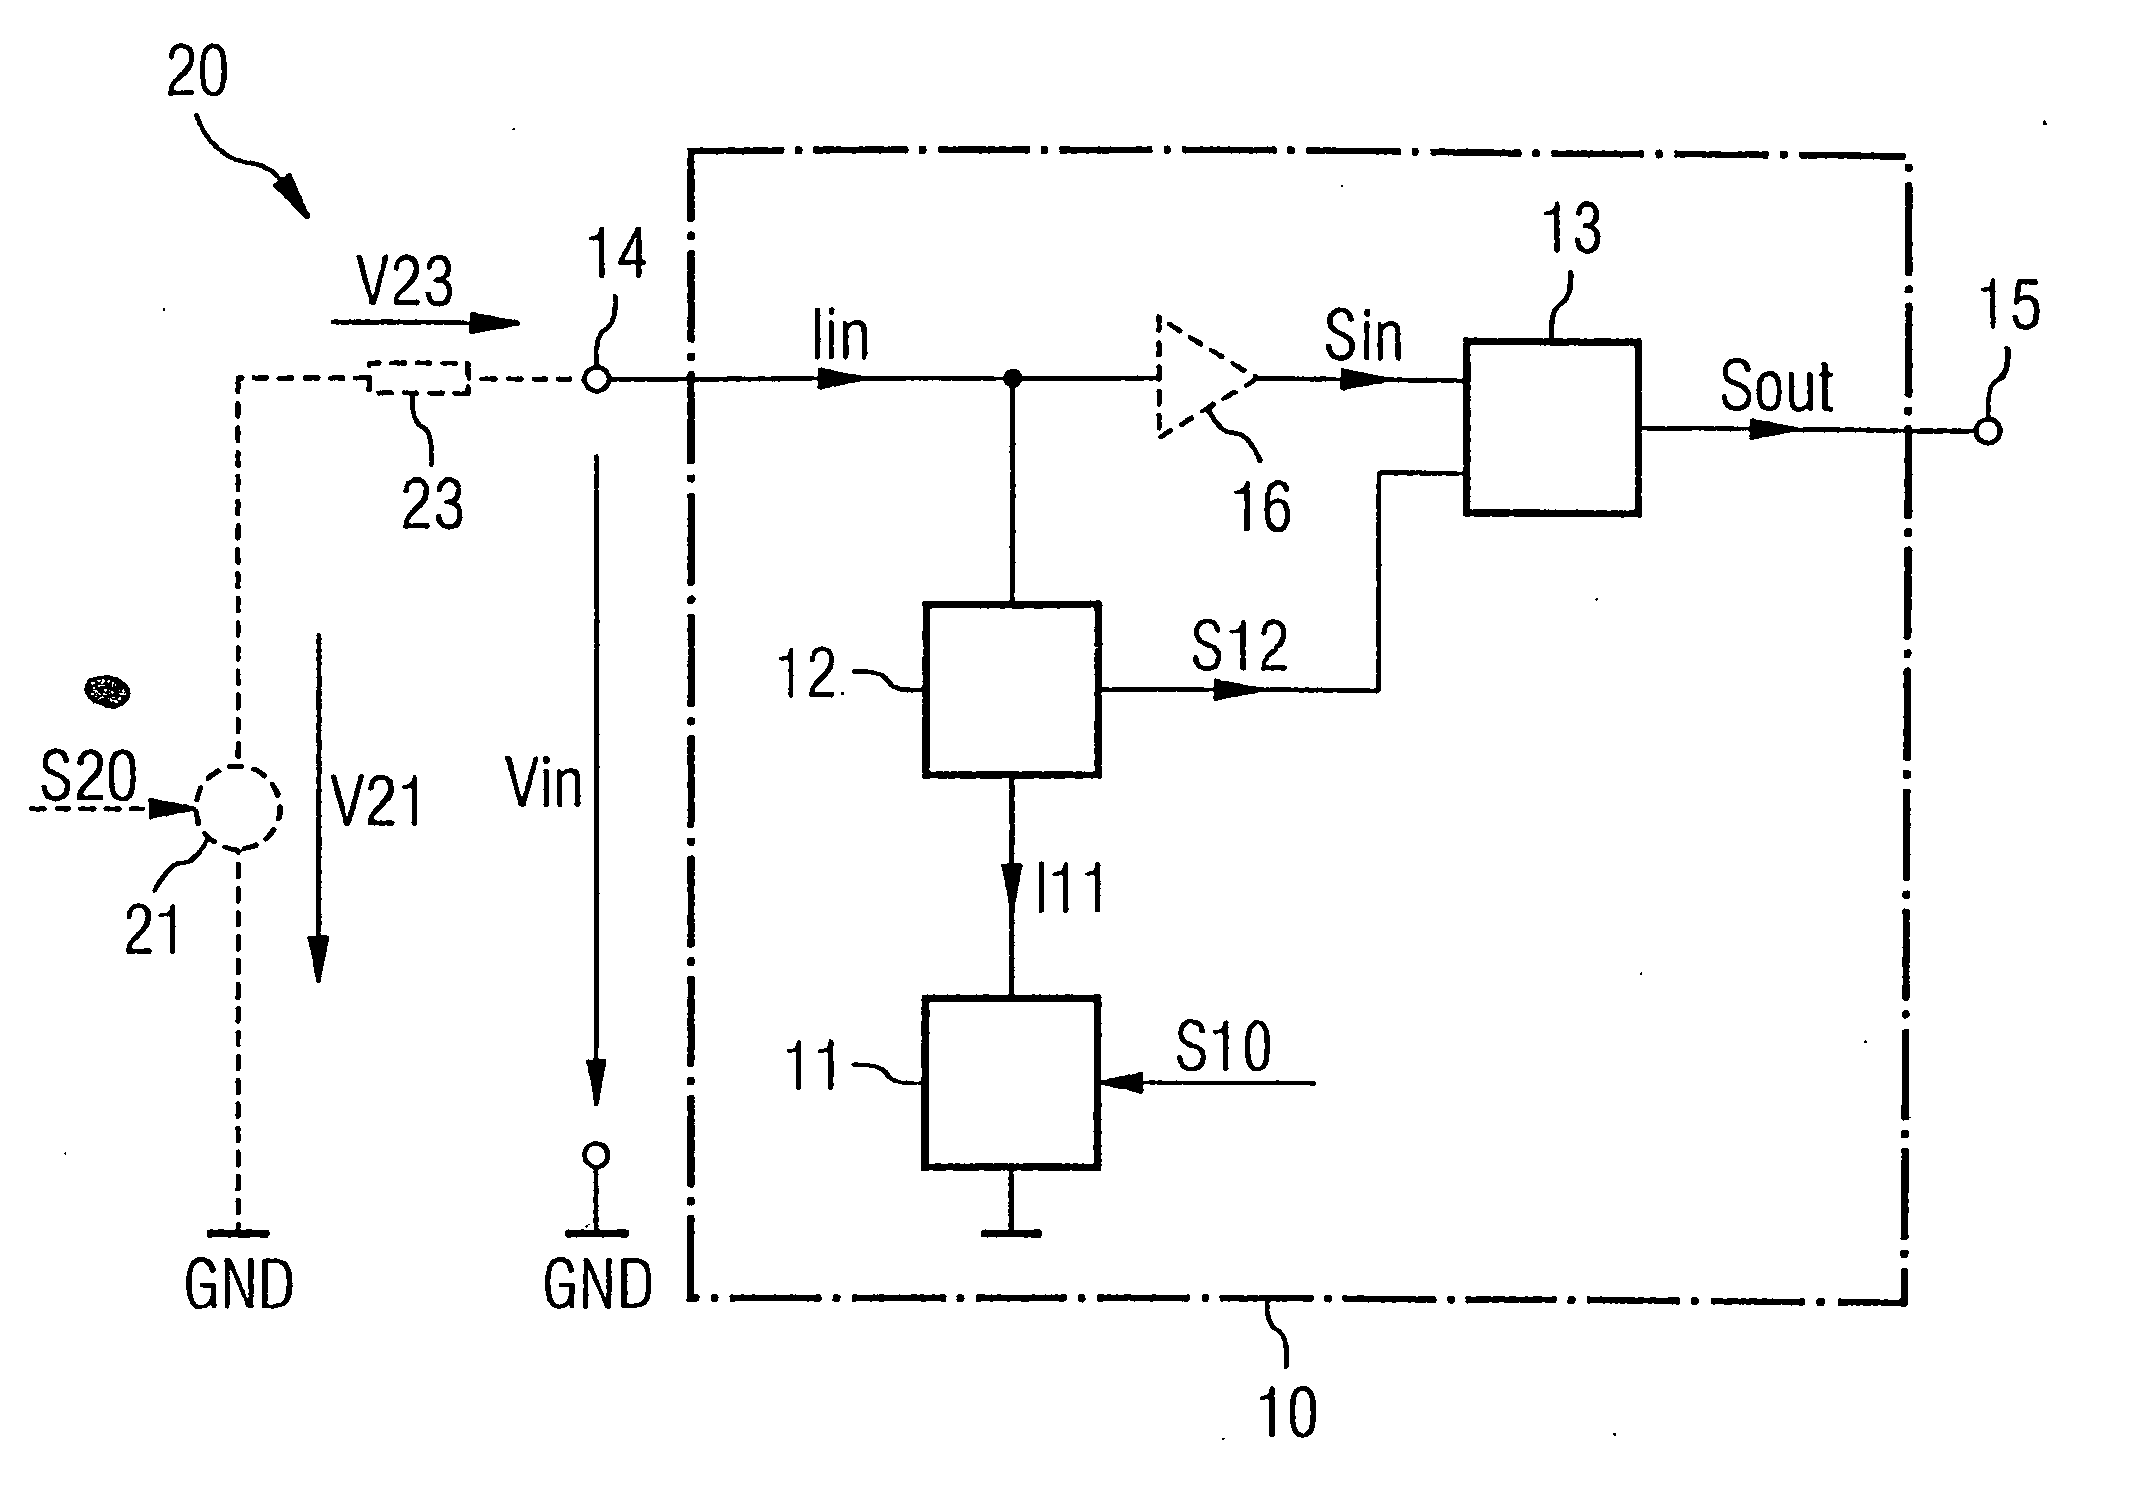 Input/output interface with current sensing